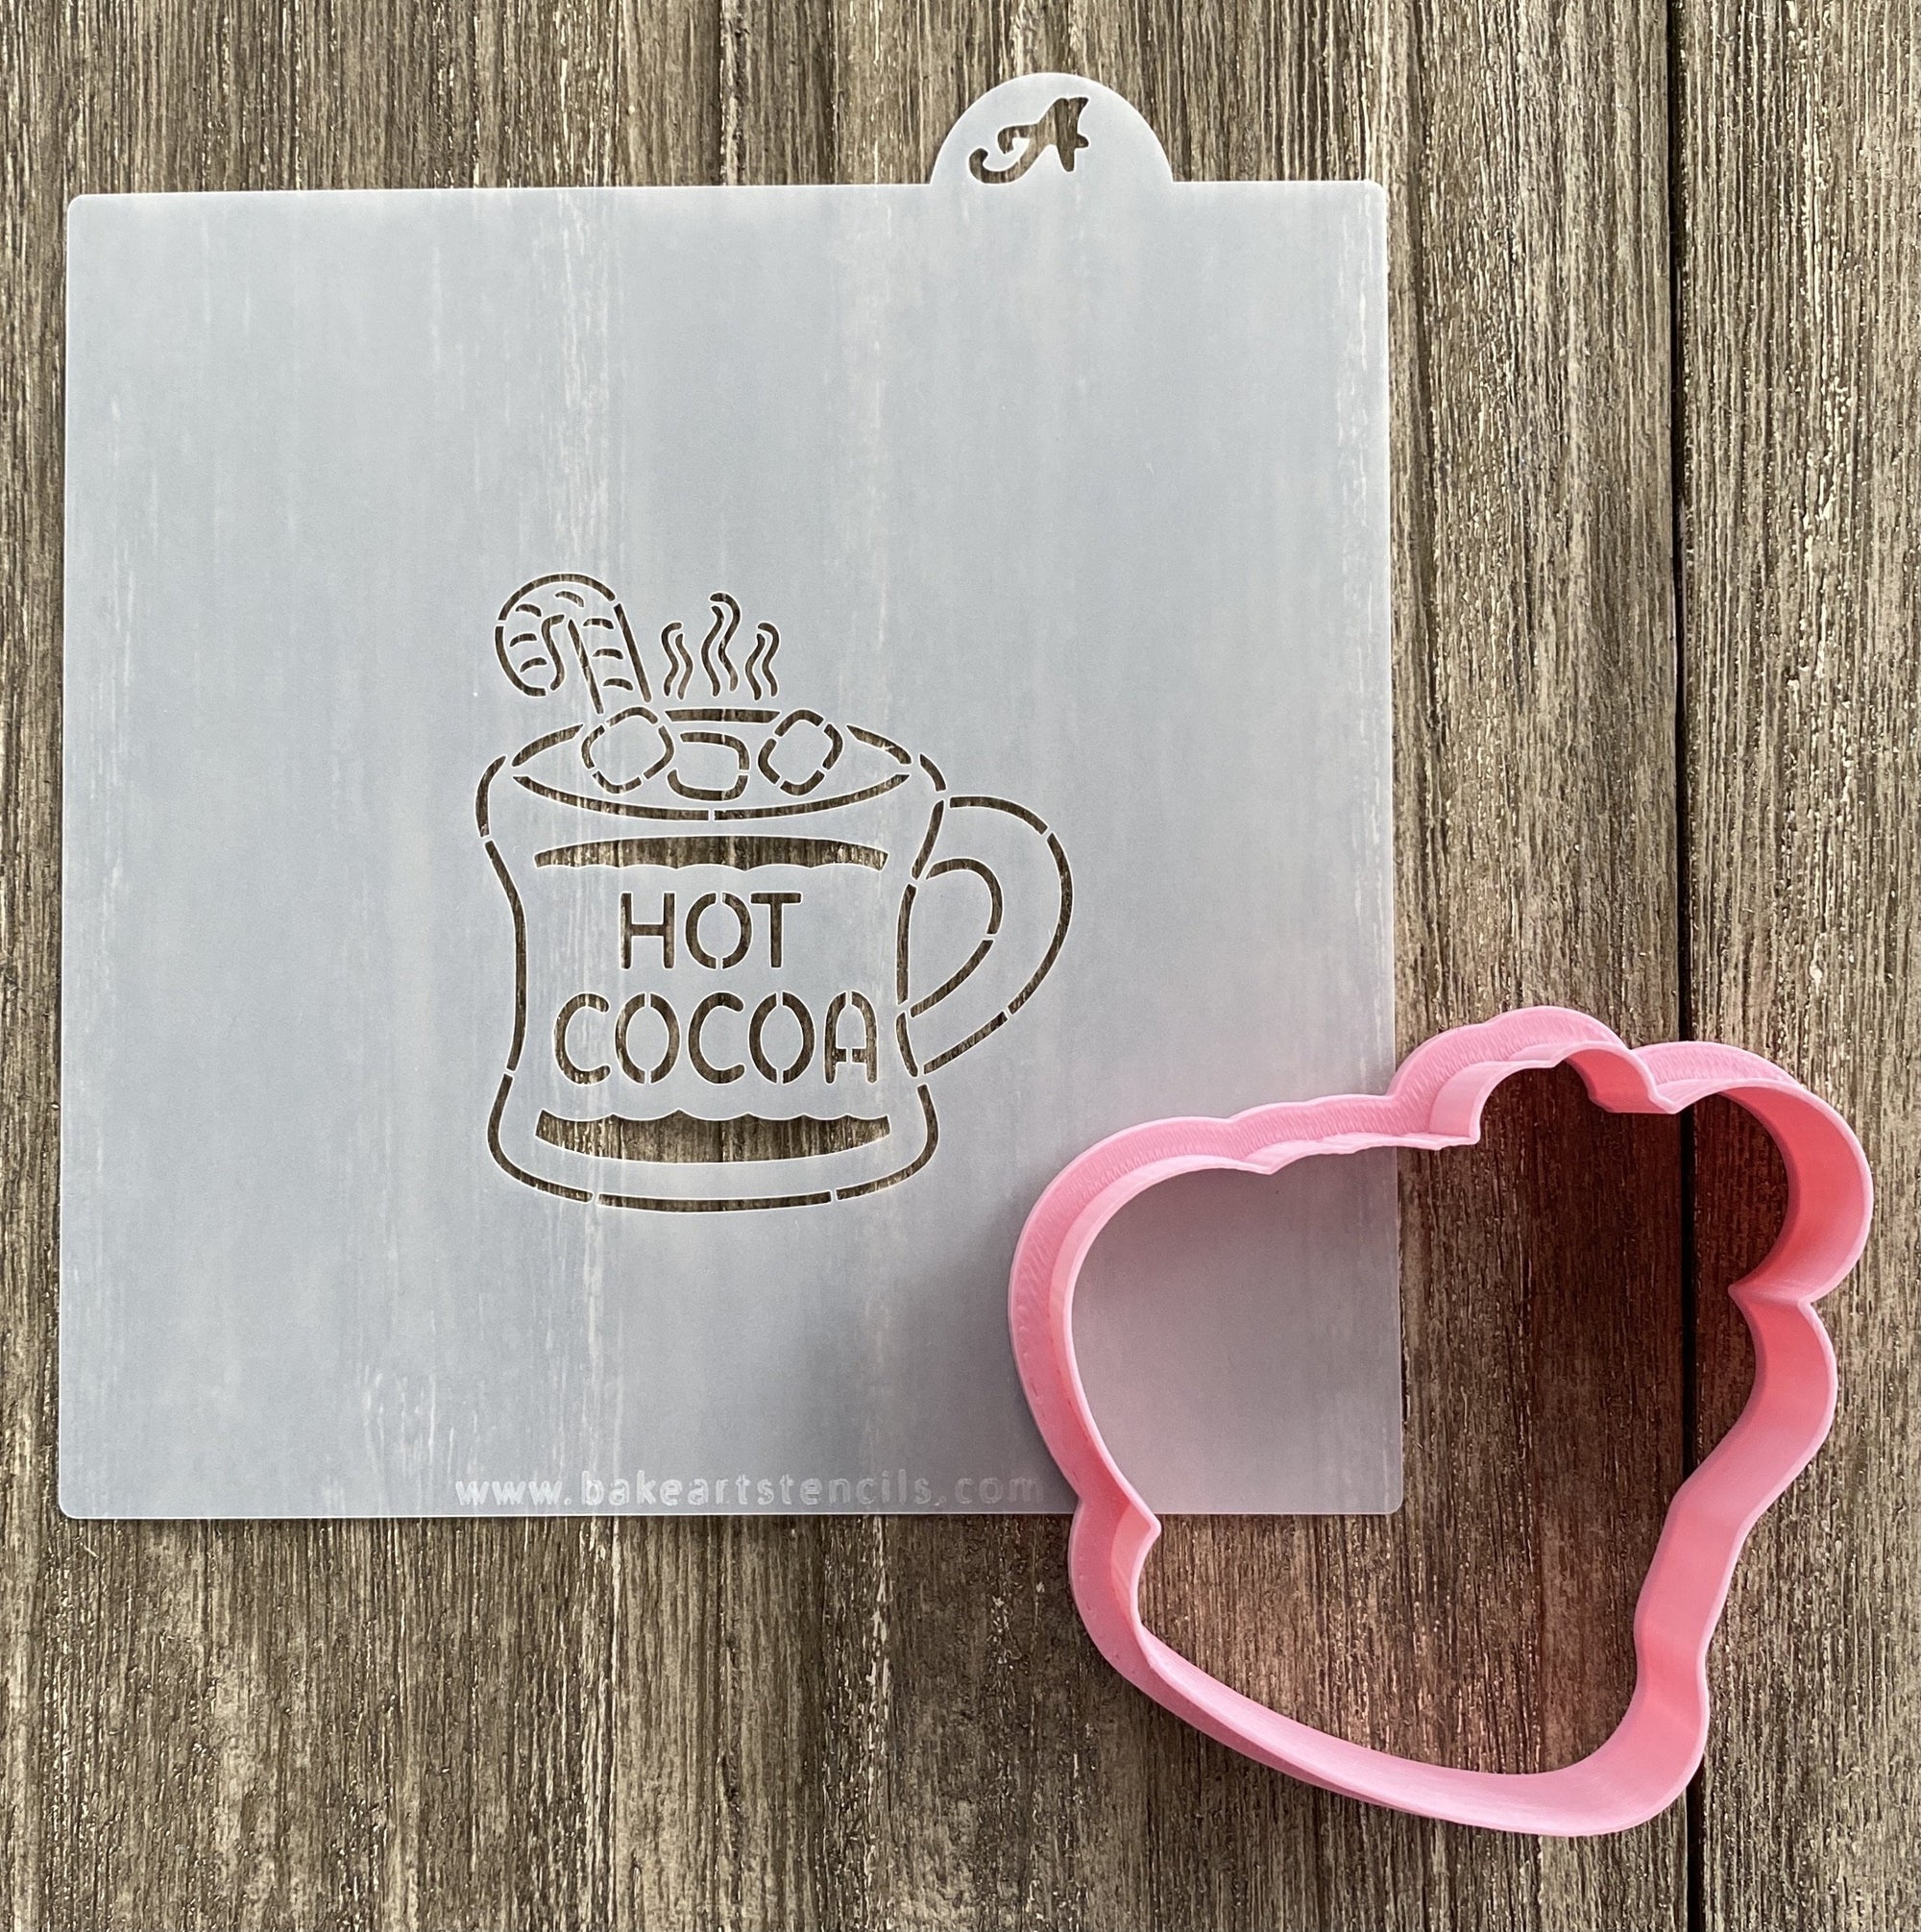 Hot Cocoa Cookie Stencil with Cutter bakeartstencil